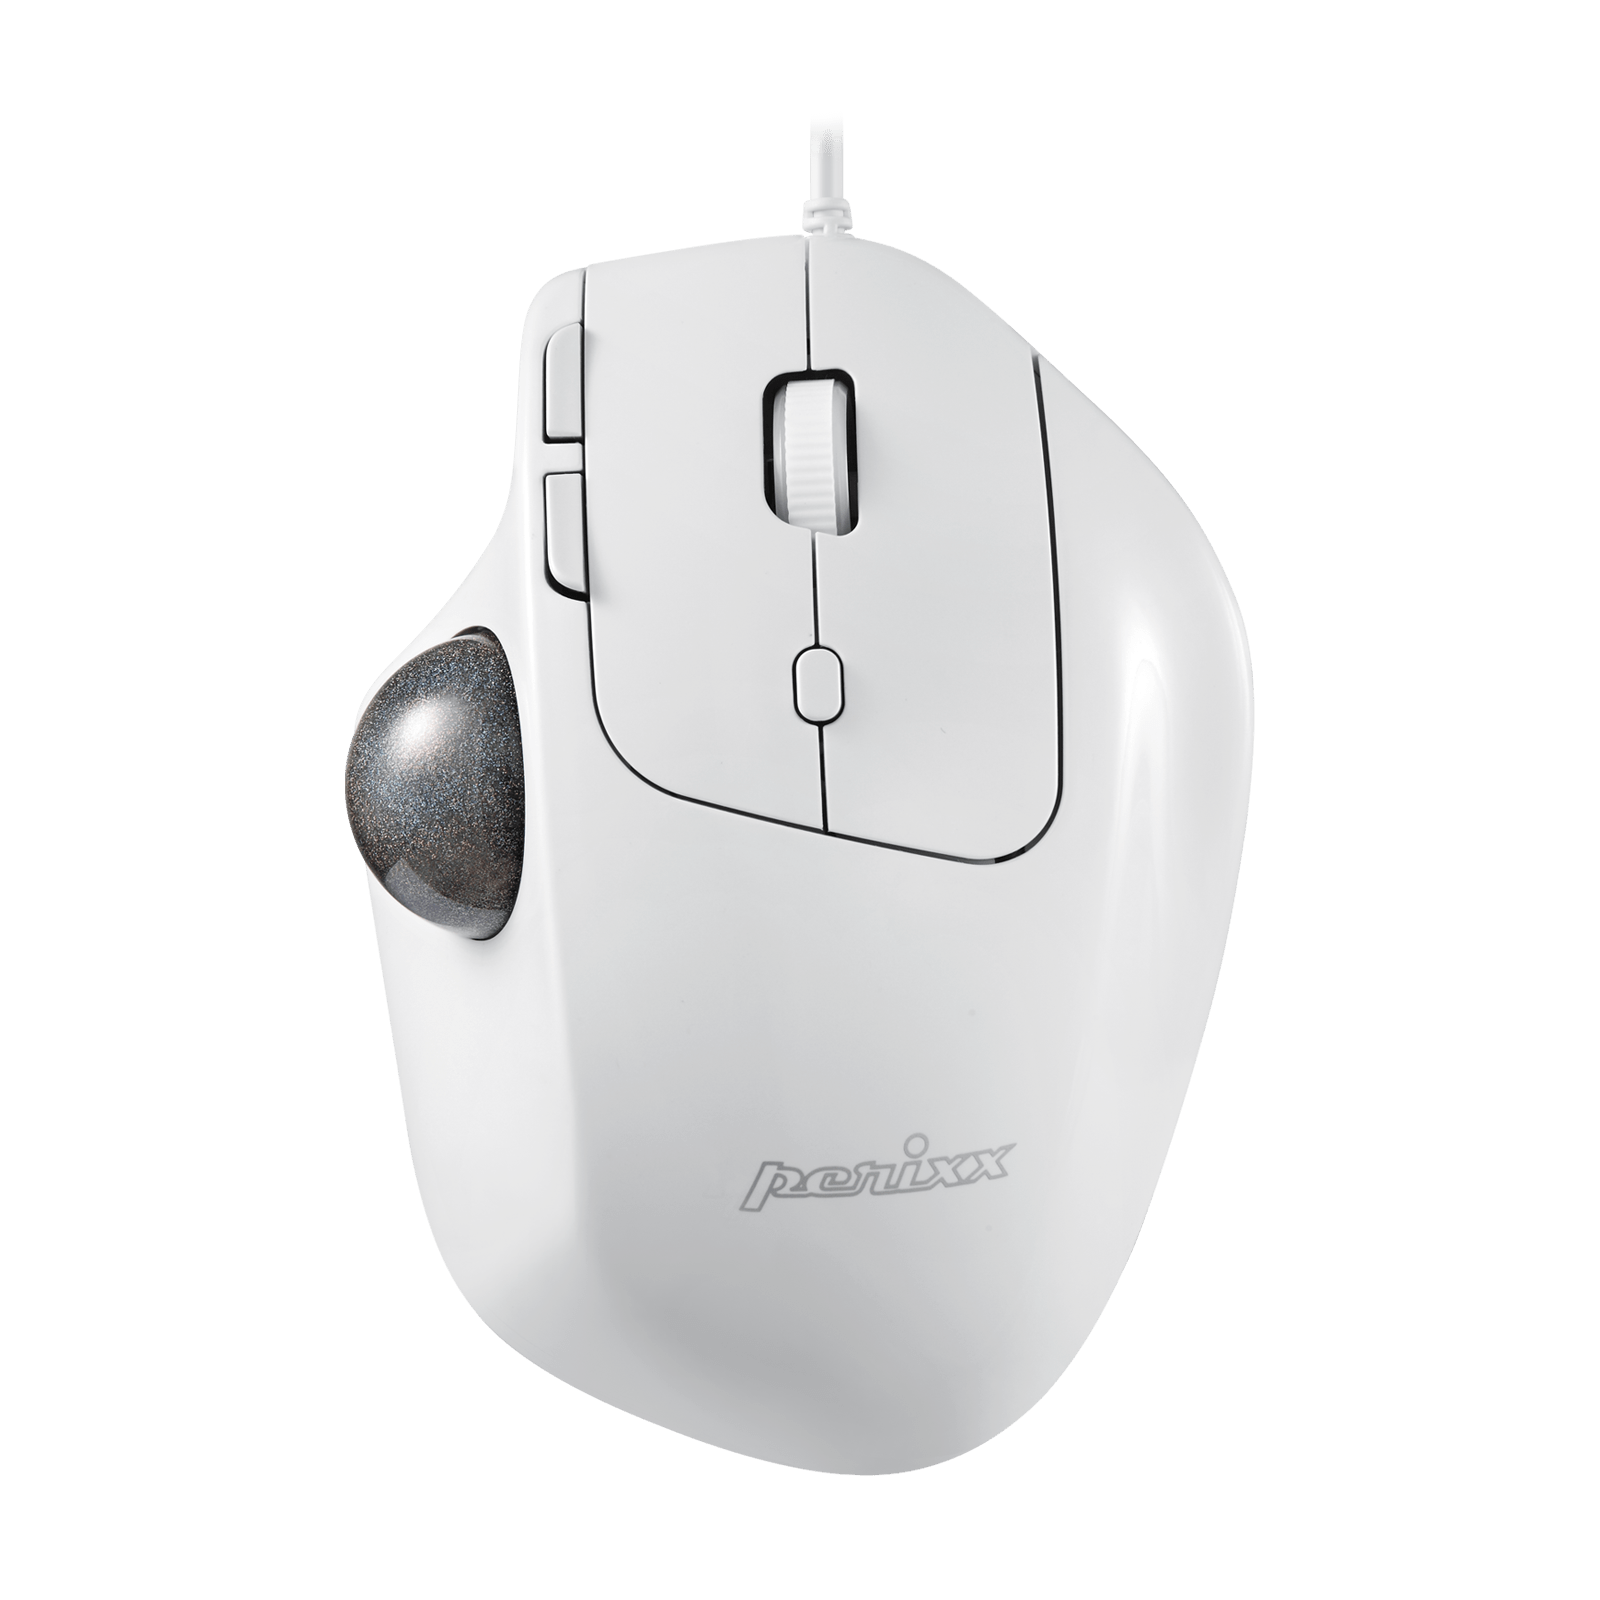 PERIMICE-520 W - Wired White Ergonomic Vertical Trackball Mouse Adjustable Angle Programmable Buttons - Perixx Europe